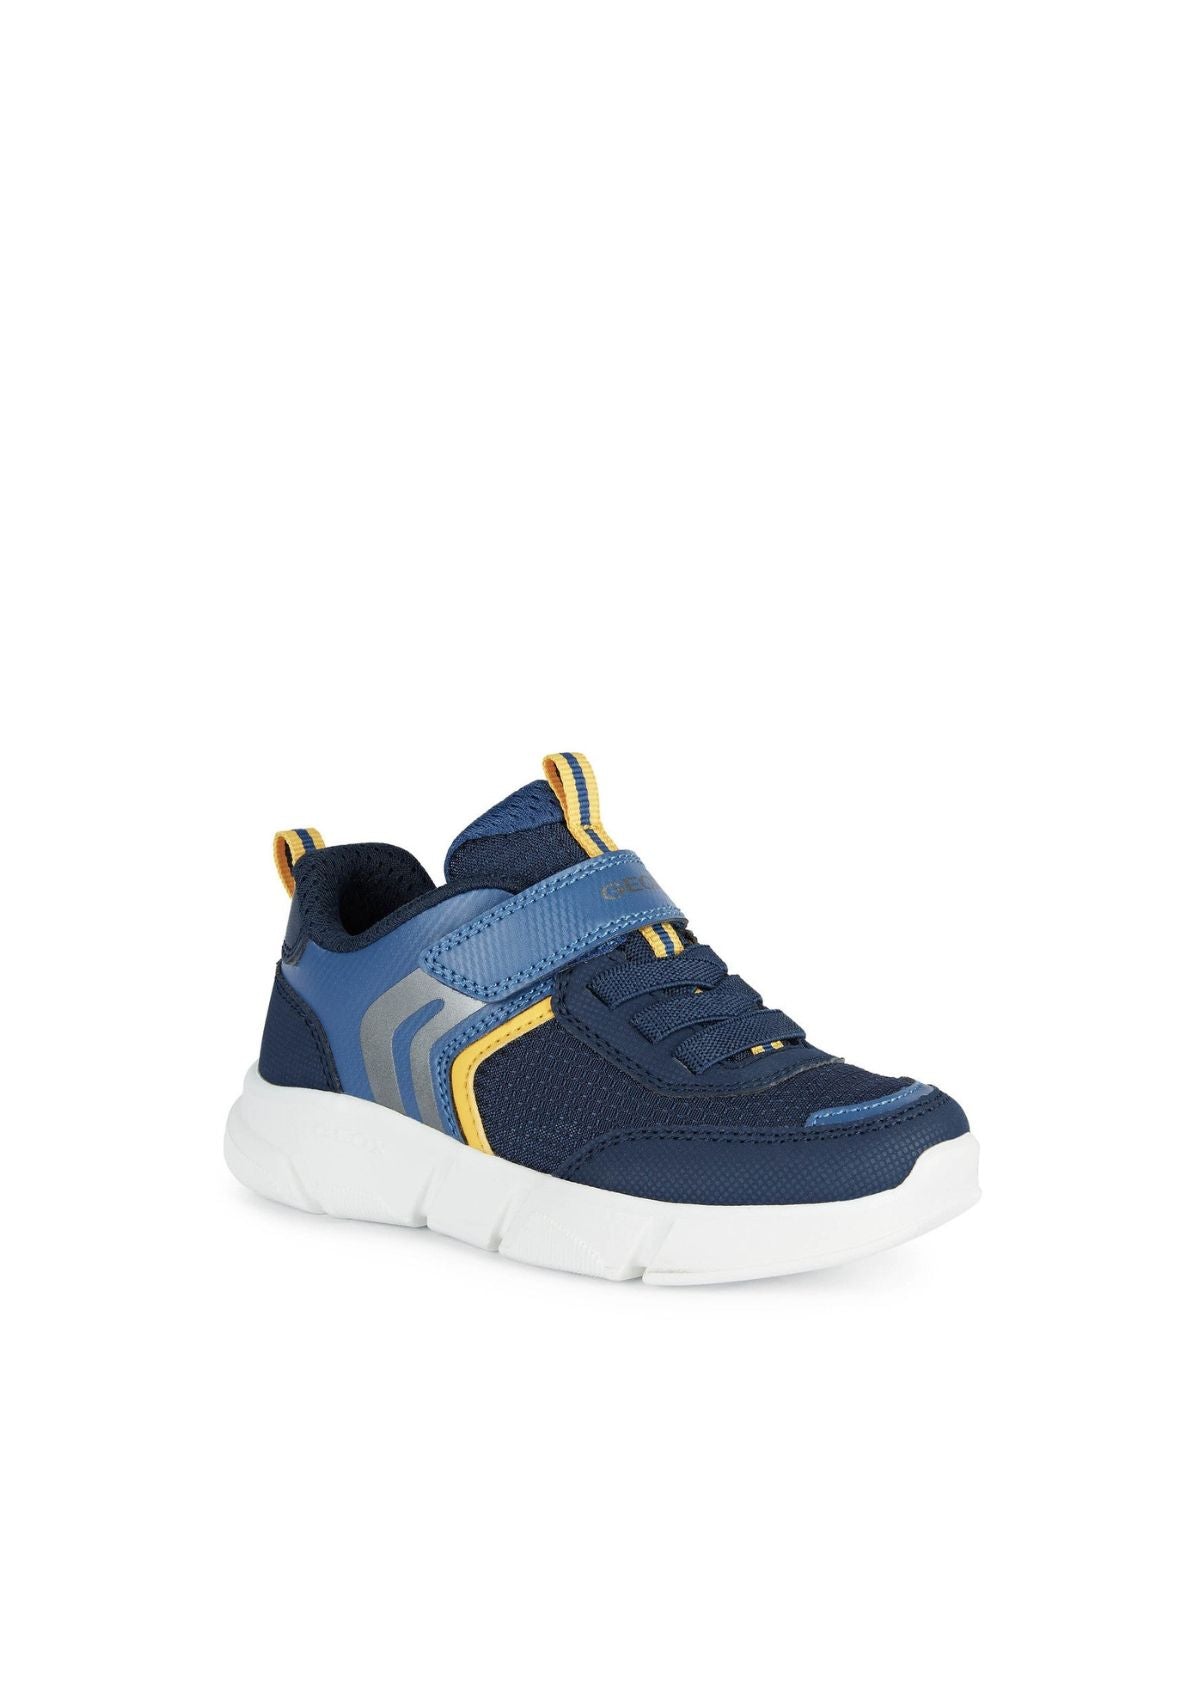 Geox Boys ARIL Navy Yellow Front